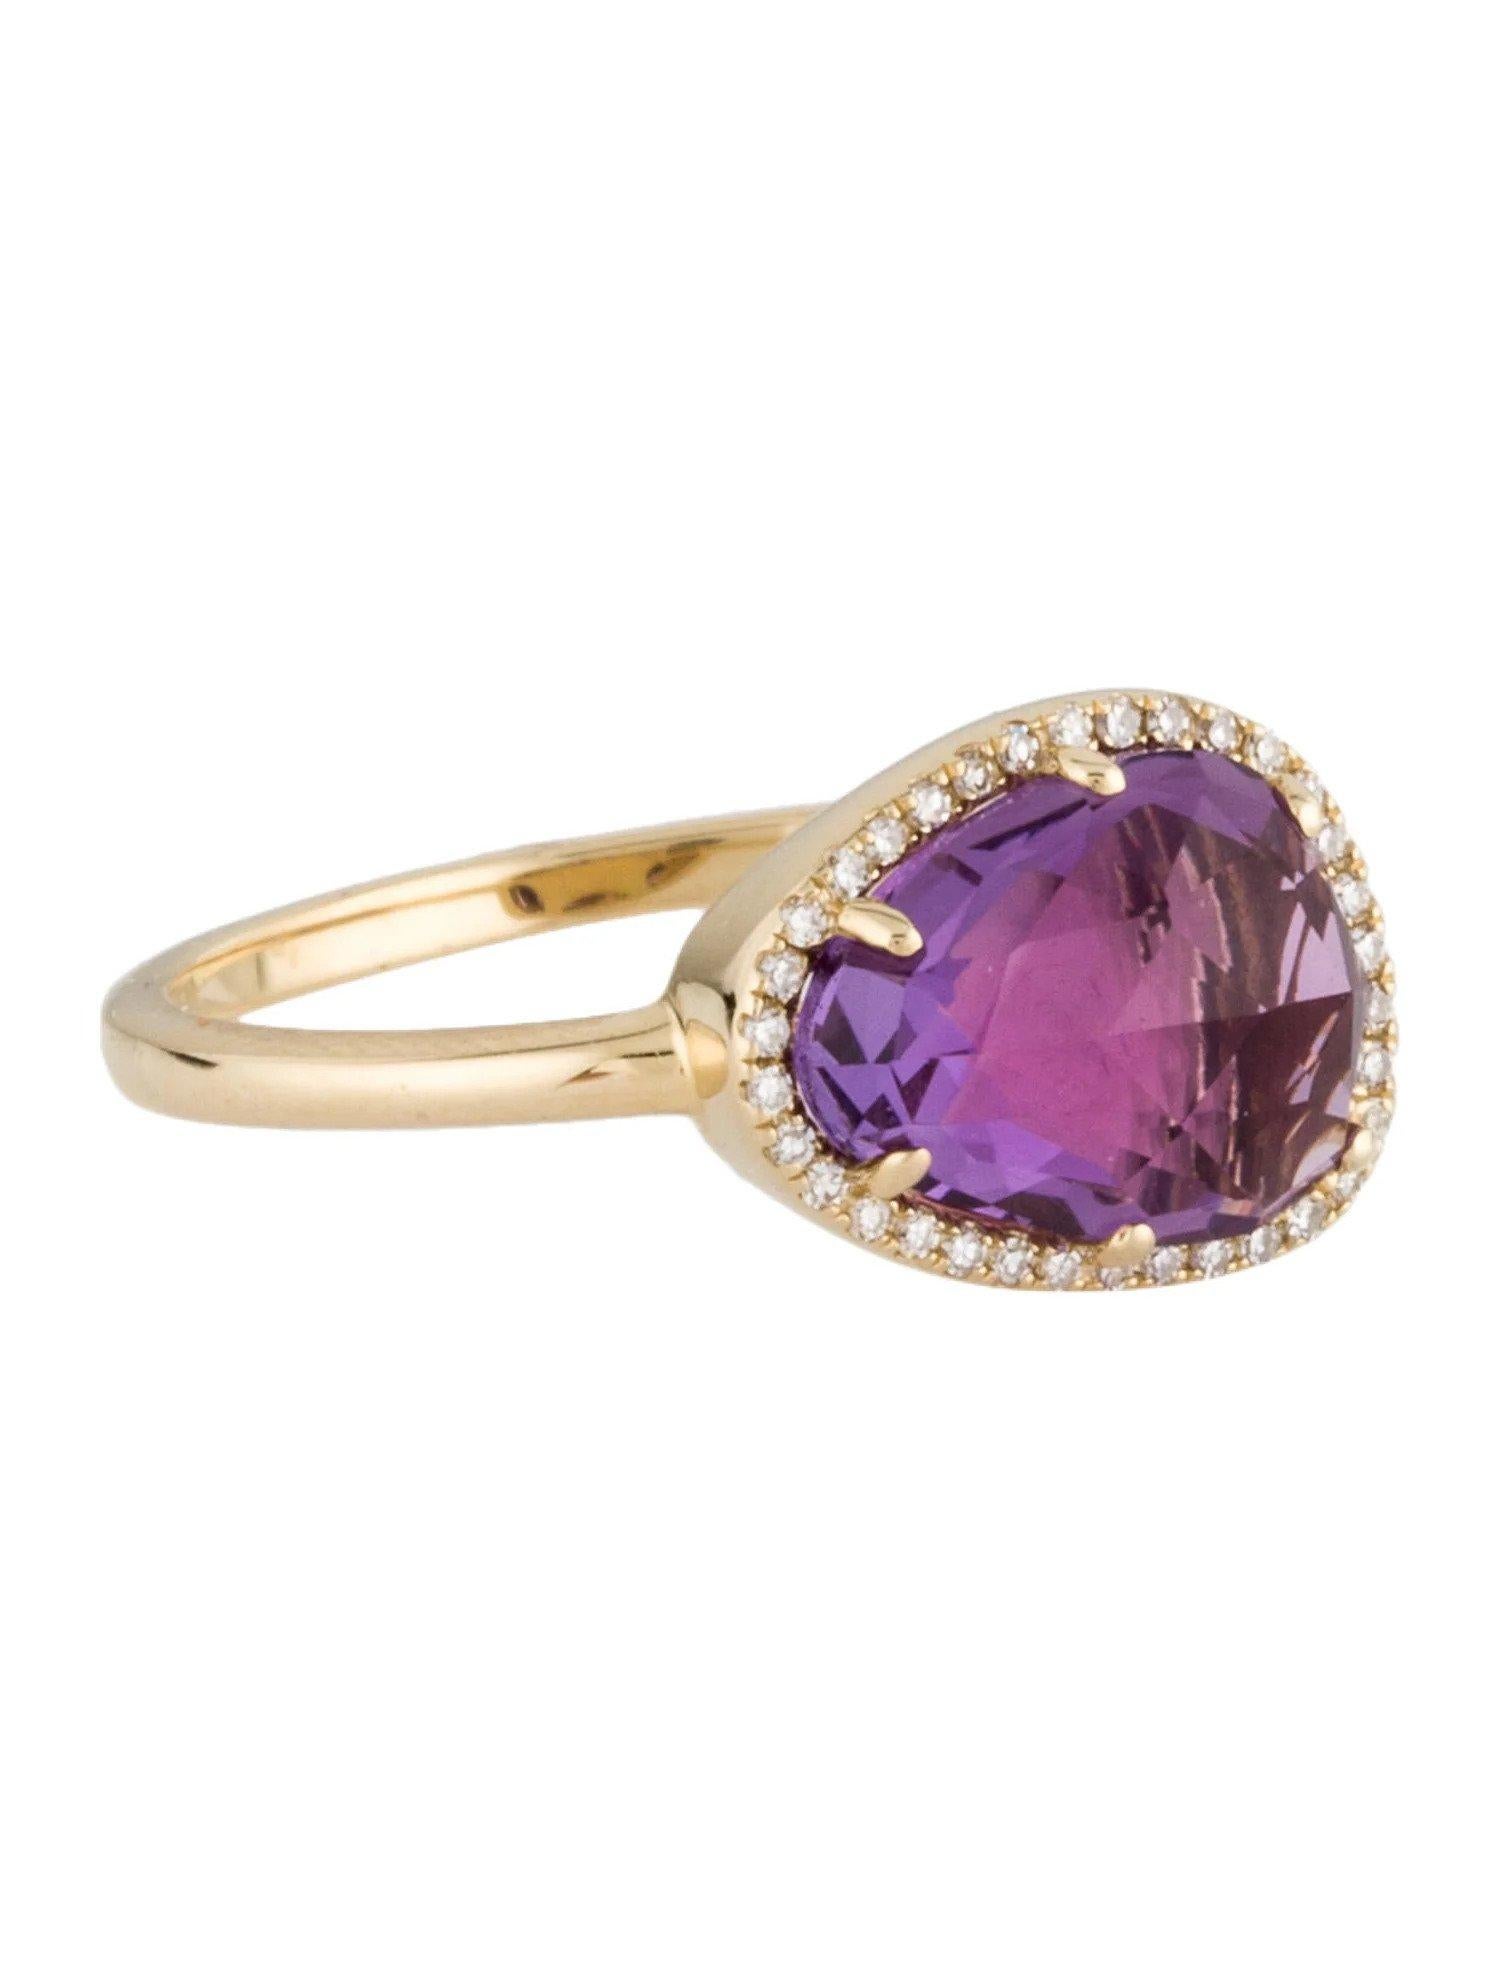 Mixed Cut 1.97 Carat Amethyst & Diamond Yellow Gold Ring For Sale